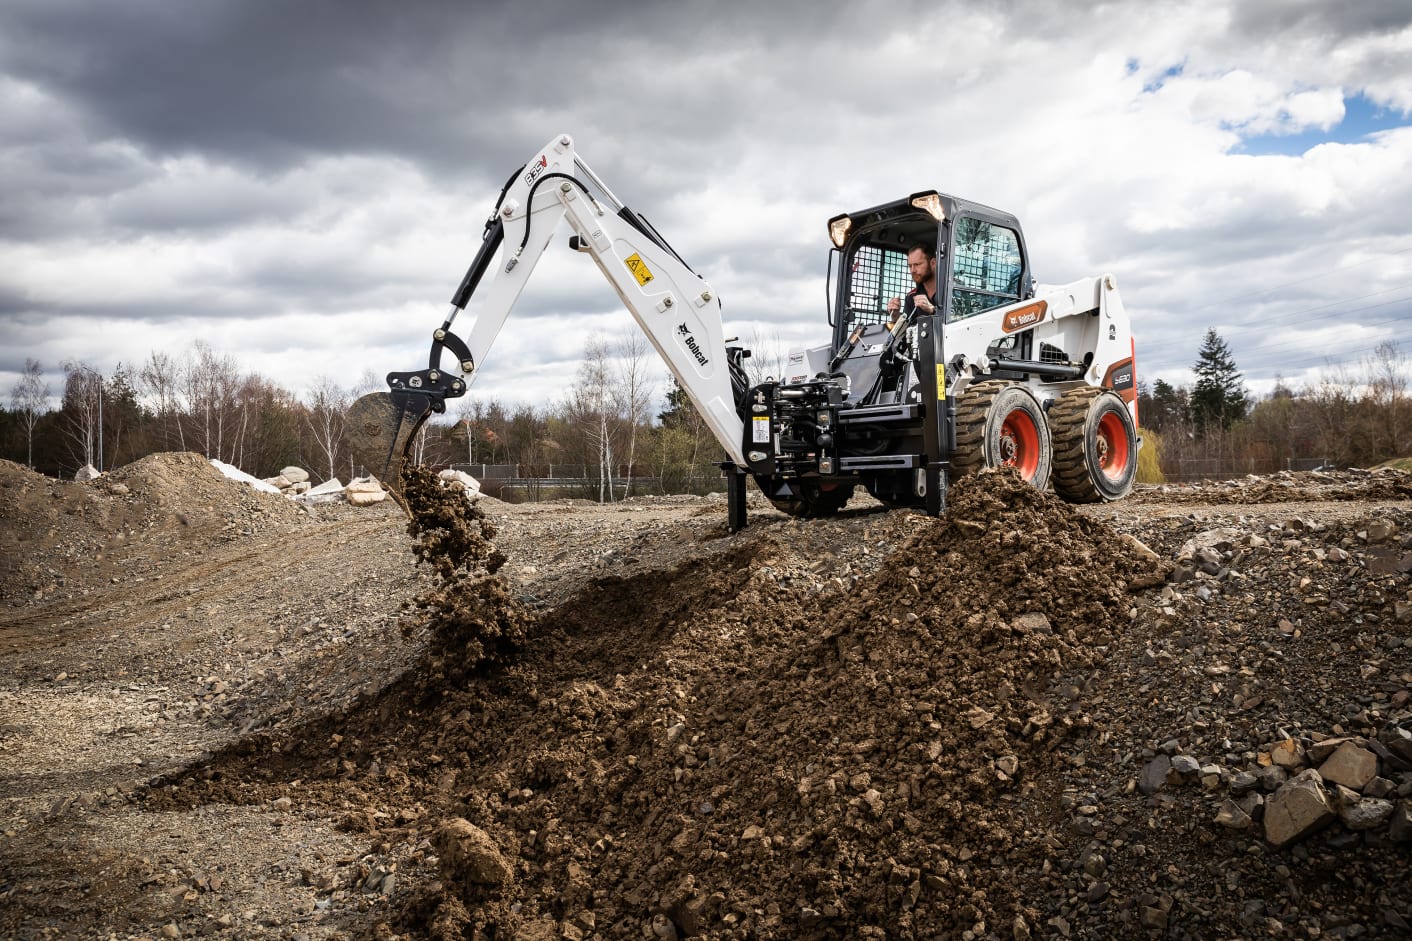 Browse Specs and more for the S630 Skid-Steer Loader - Bobcat of Atlanta